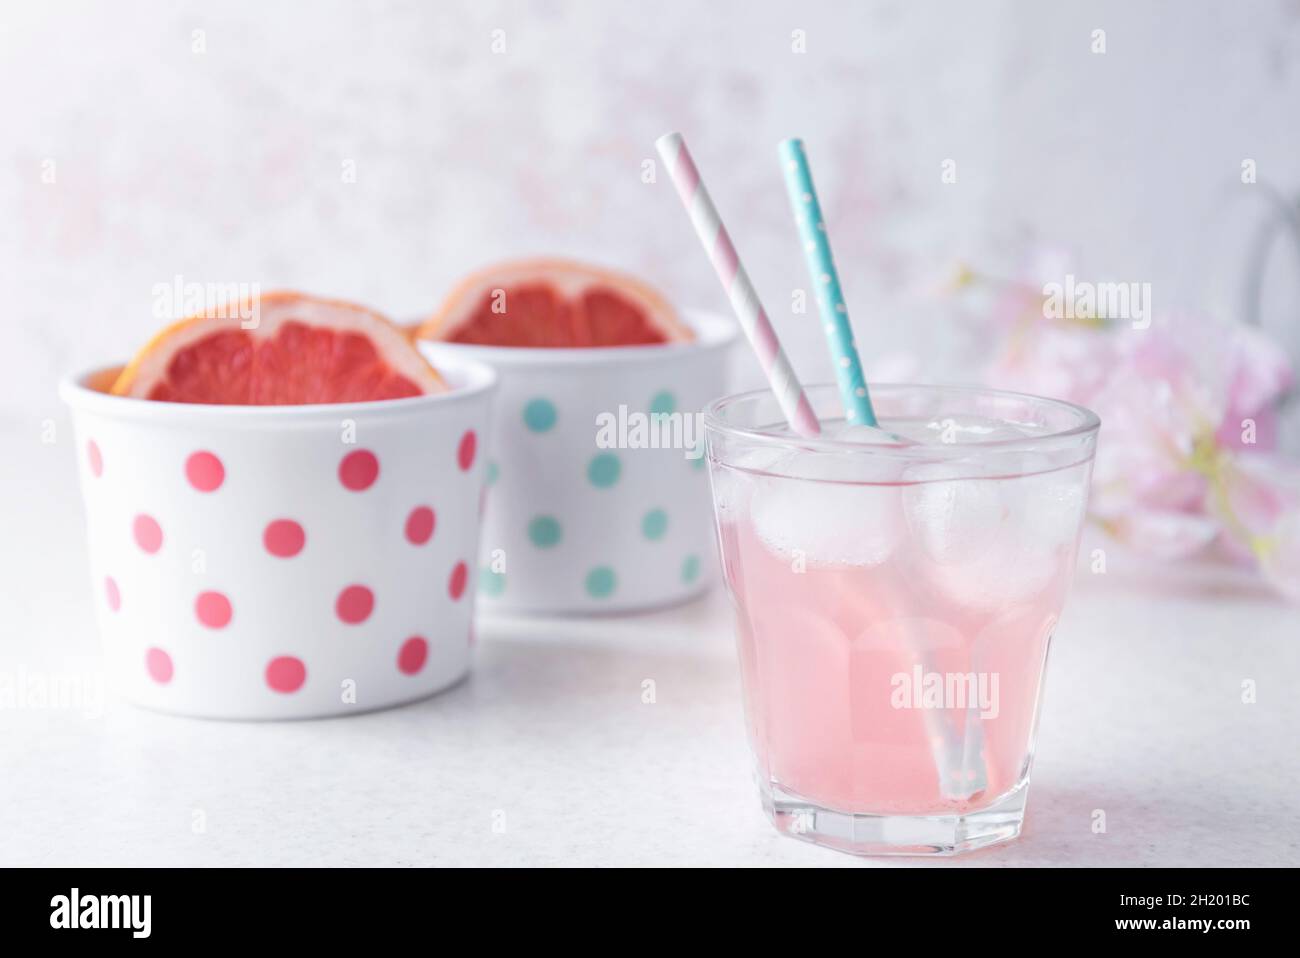 A glass of pink colored grapefruit infused water with pastel colored beverage straws, halved grapefruit in polka dotted bowls Stock Photo